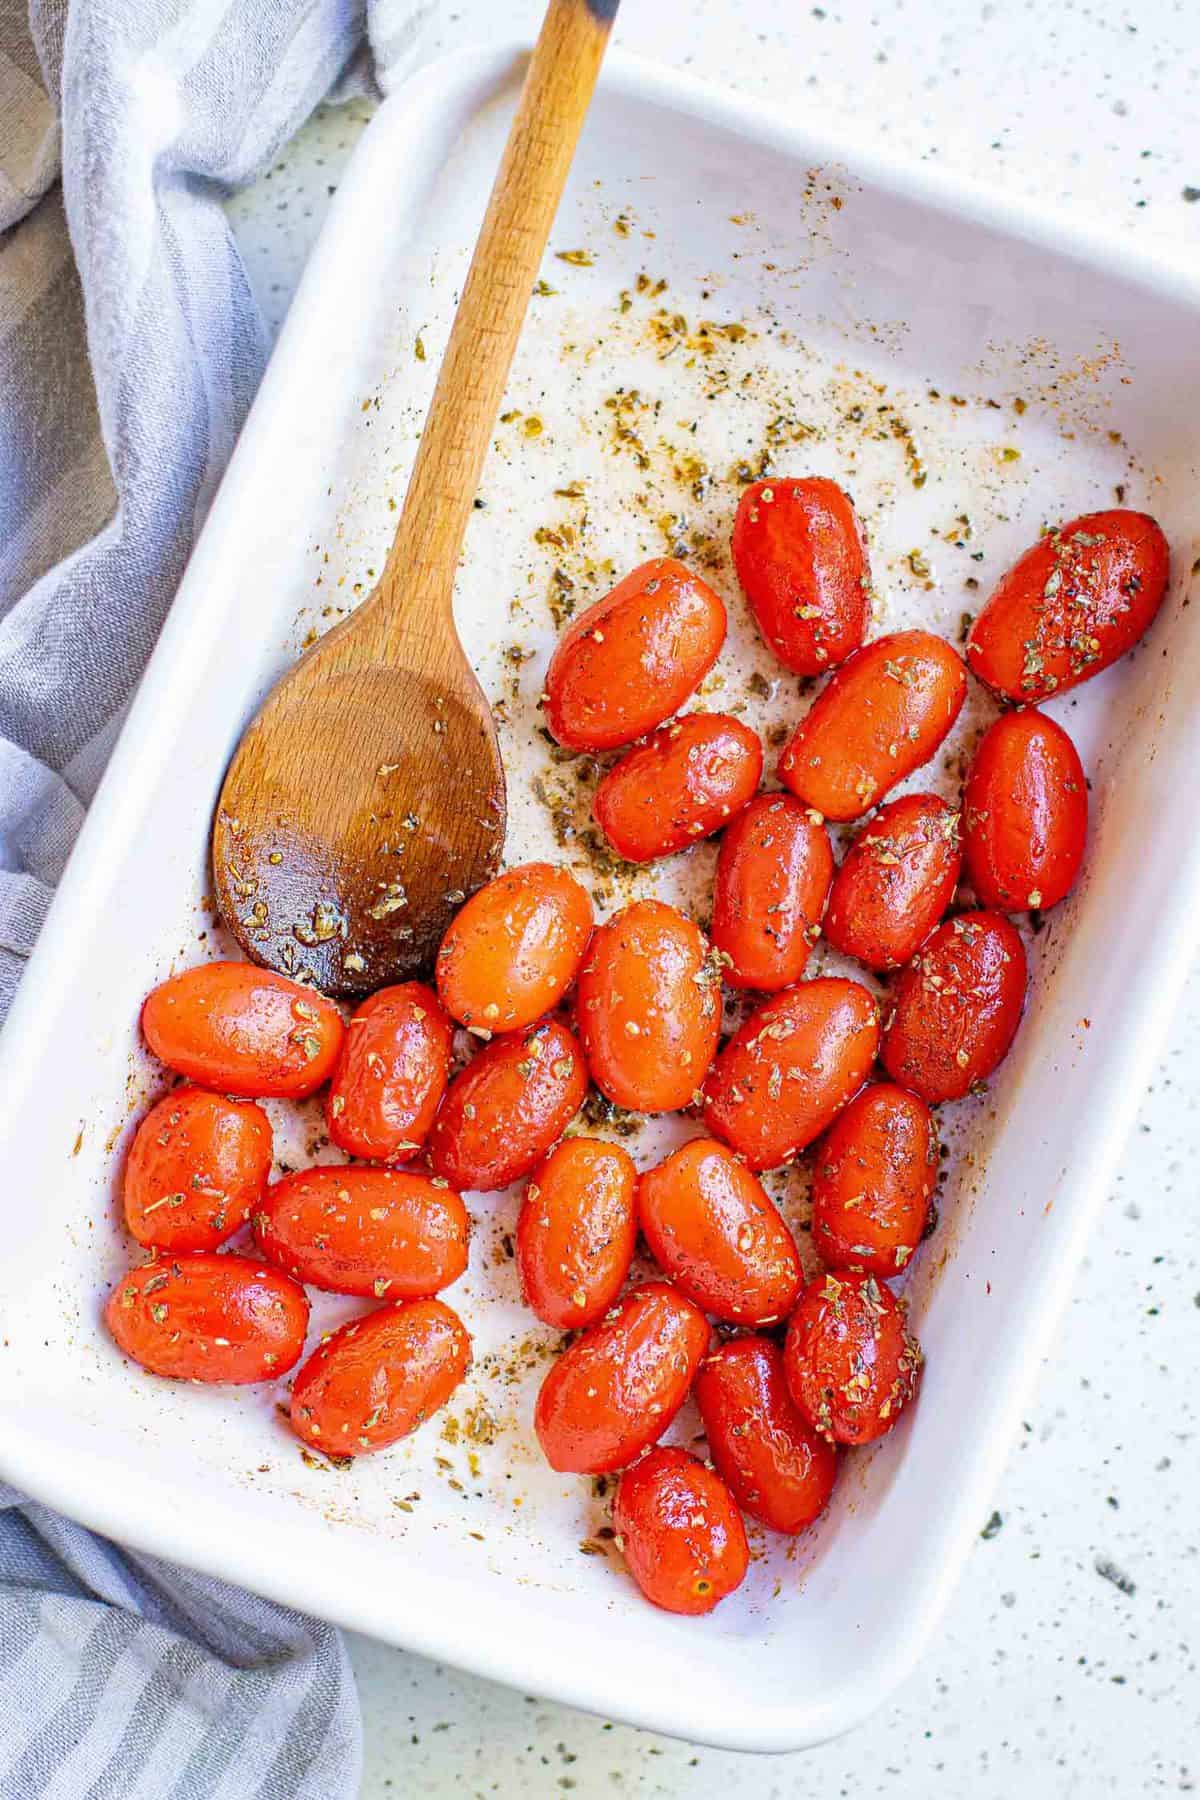 Tomatoes and seasonings in a white baking dish.